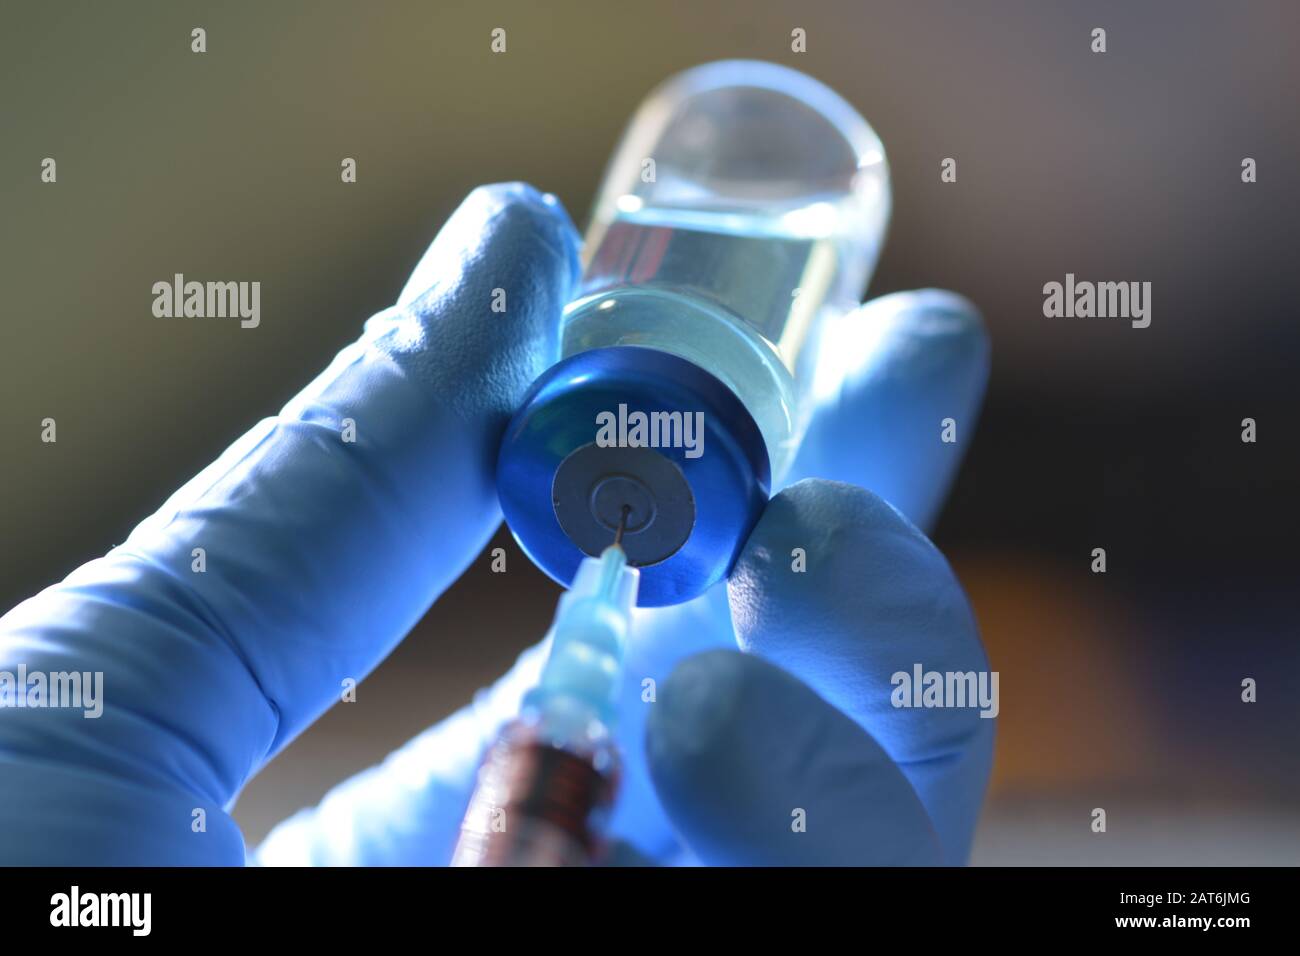 Syringe draws liquid medication from blue colored vial in gloved hand of nurse. Stock Photo